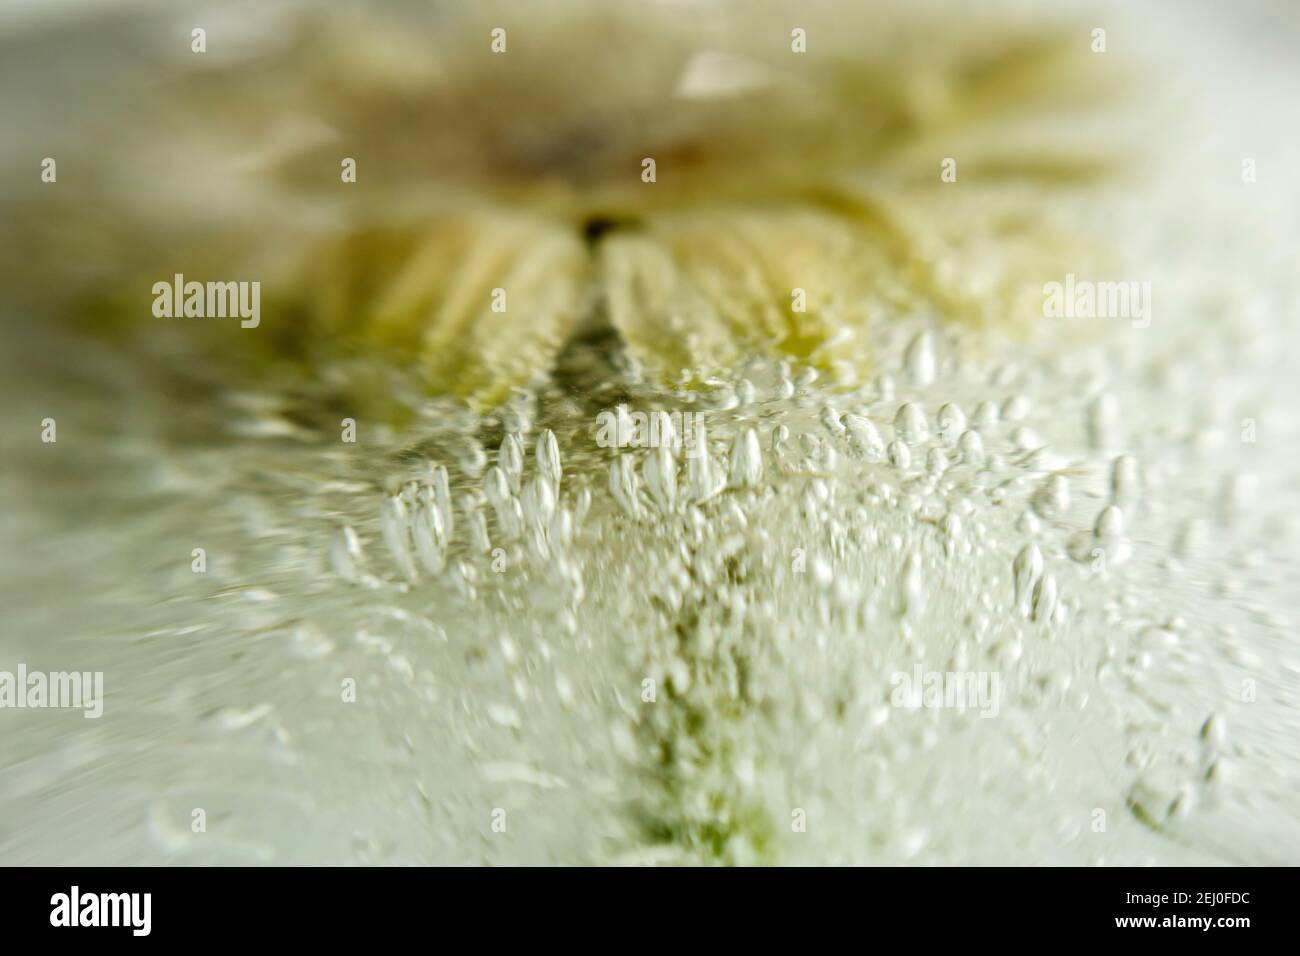 WA19256-00...WASHINGTON -  Gerbera in frozen water photographed with a Lensbaby Velvet 85. Stock Photo